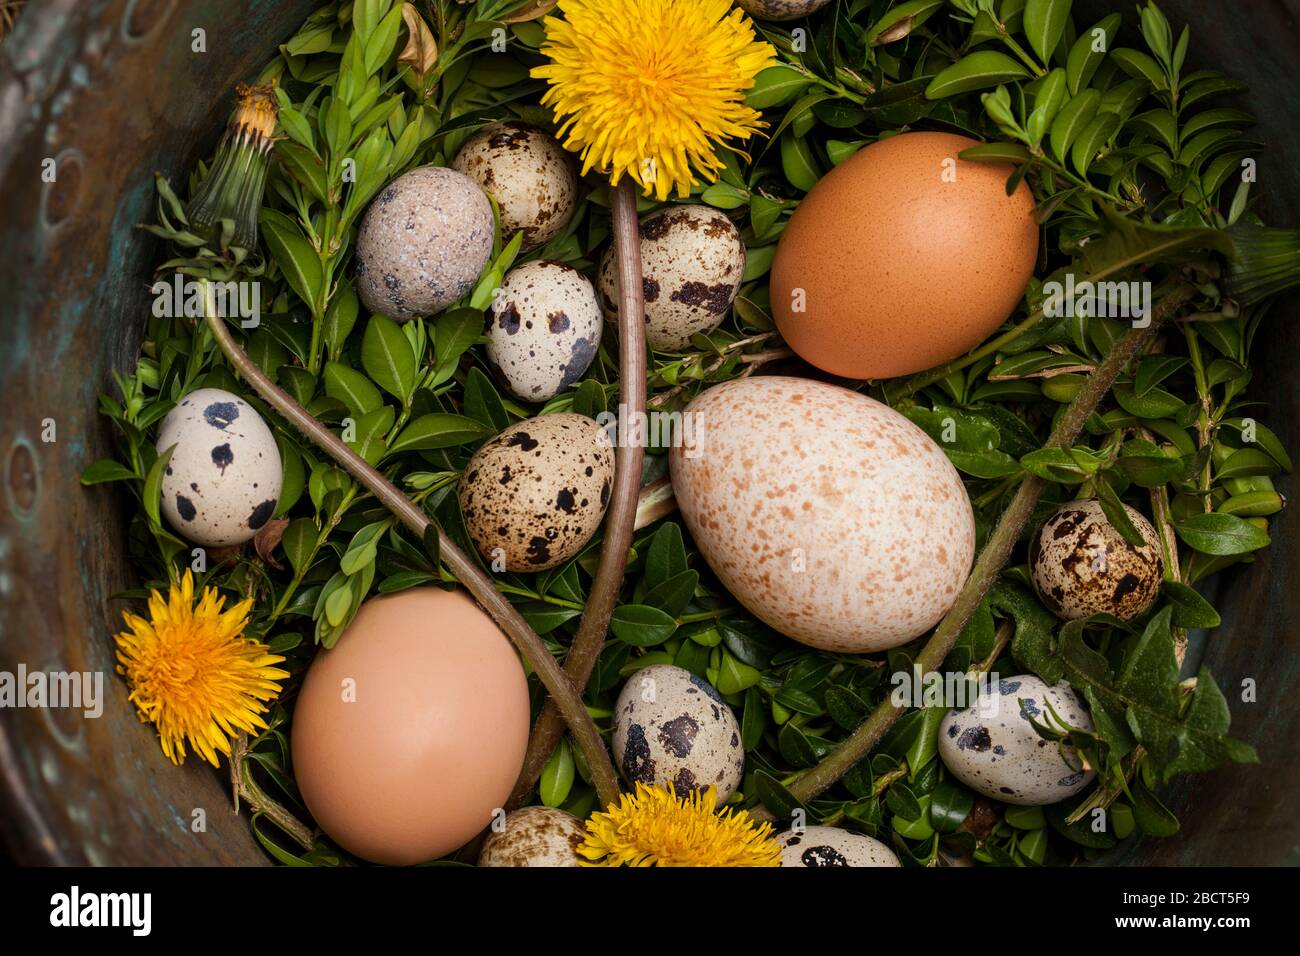 Vintage chicken,turkey and quail eggs in a copper bowl. Easter concept. Stock Photo